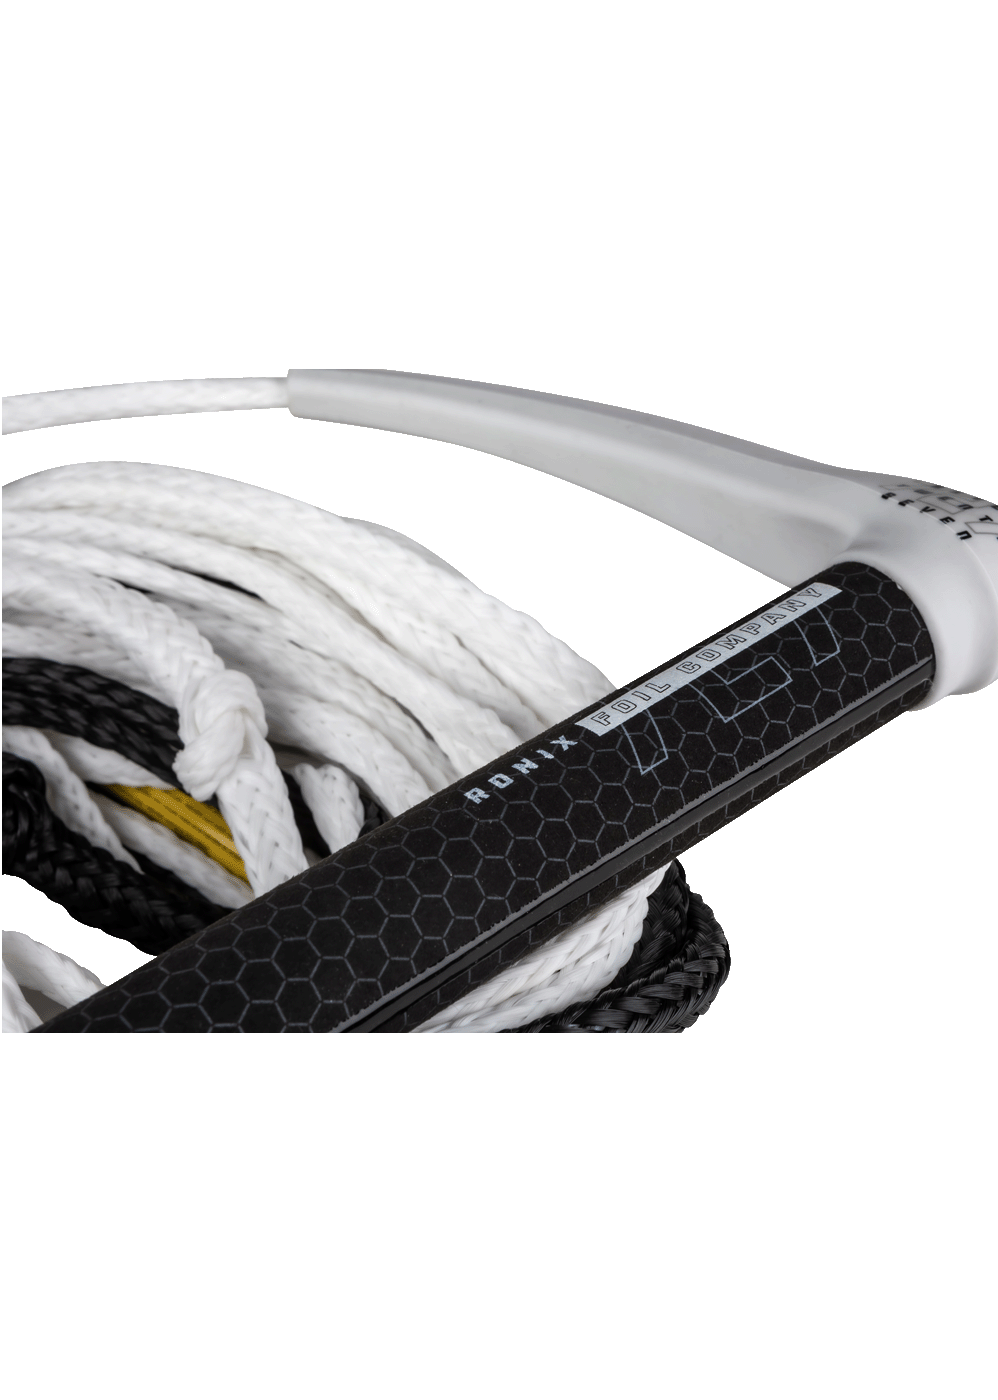 Ronix 727 Foil Combo Package - Black / White